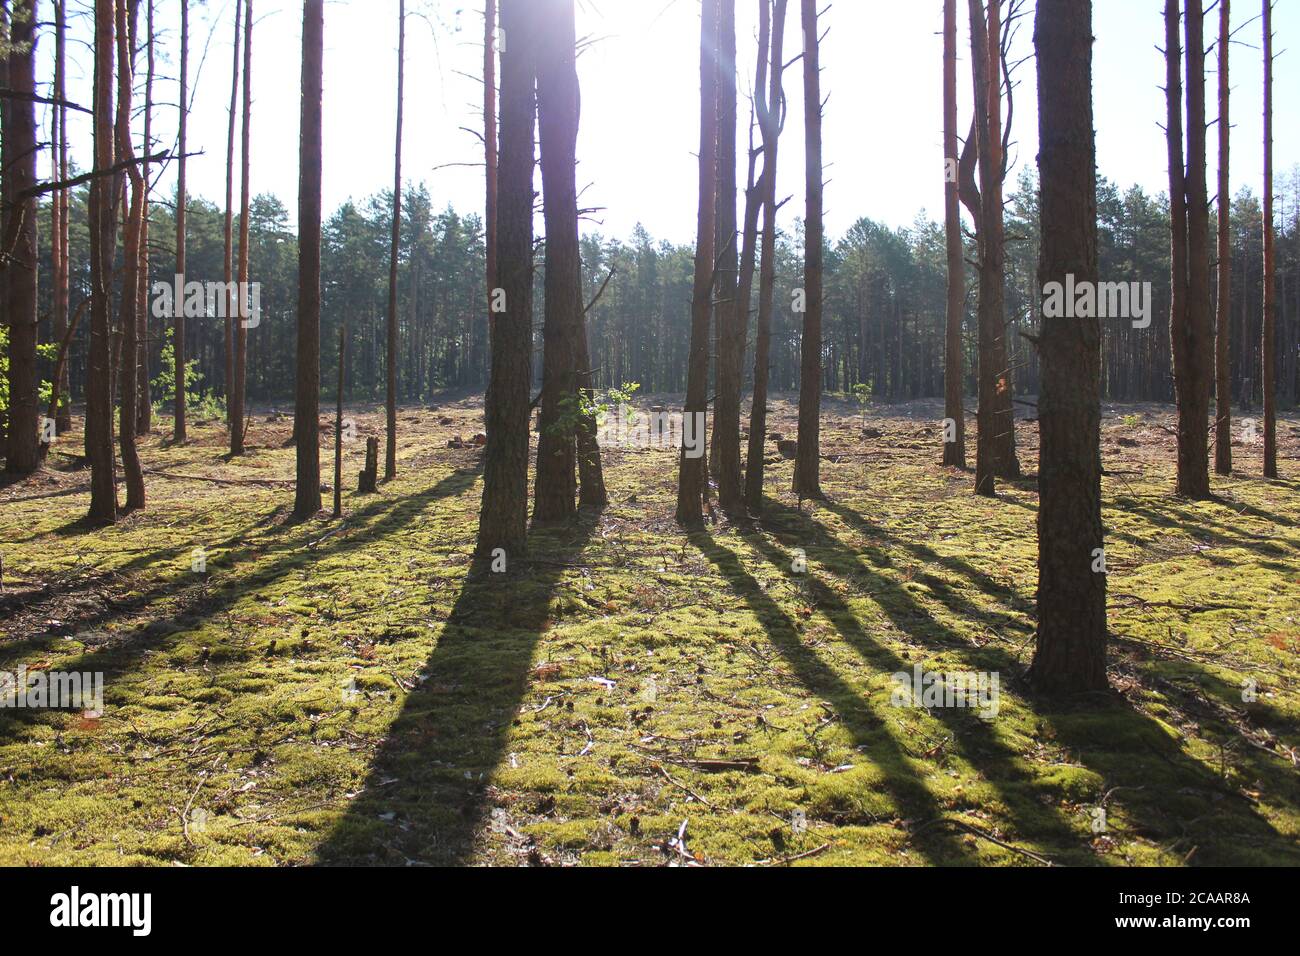 forest forest landscape high pines in straight rows behind the trees you can see a clearing with stumps the sun shines and the shadows fall in long sh Stock Photo